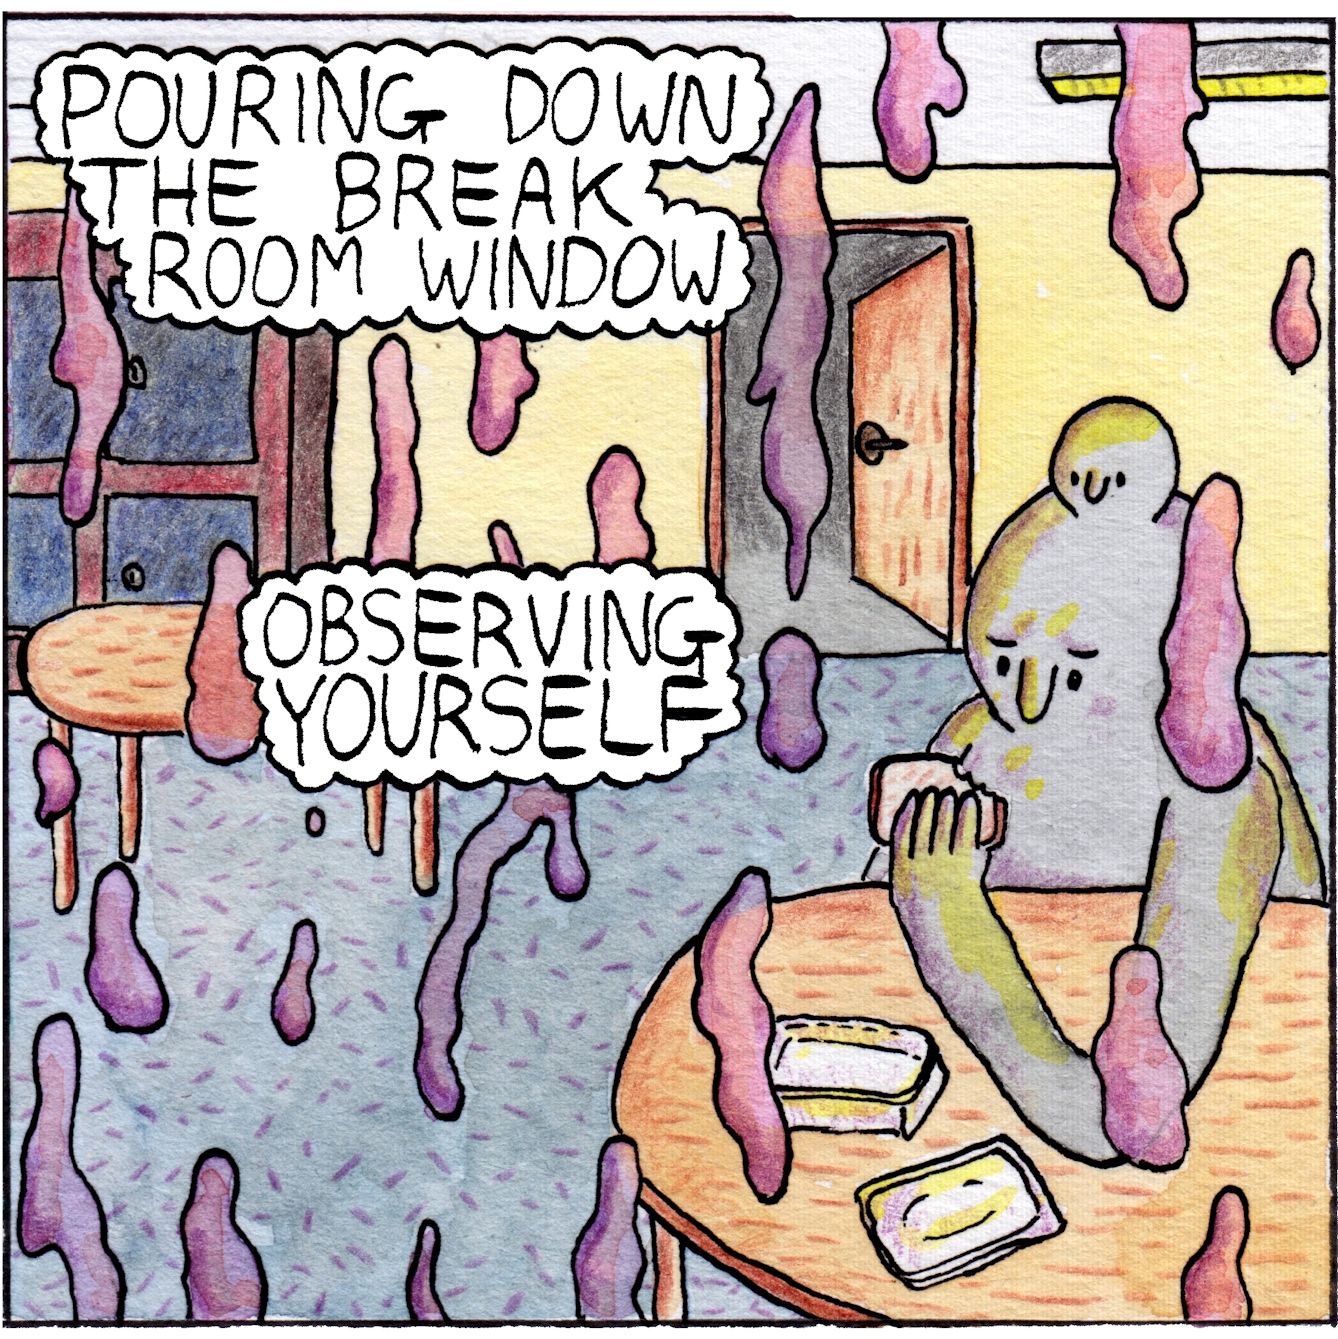 Panel six of the webcomic 'Unpaid break'. We are looking into the work room from panel one where the same two-headed character sits at a table looking down at their sandwich. Behind them is an open door, another table and lockers against the backwall. We are looking into the room through the window and between us and the room. purplish drips of rain slide down an invisible pane of glass. Two text bubbles say "Pouring down the break room window". "Observing self".